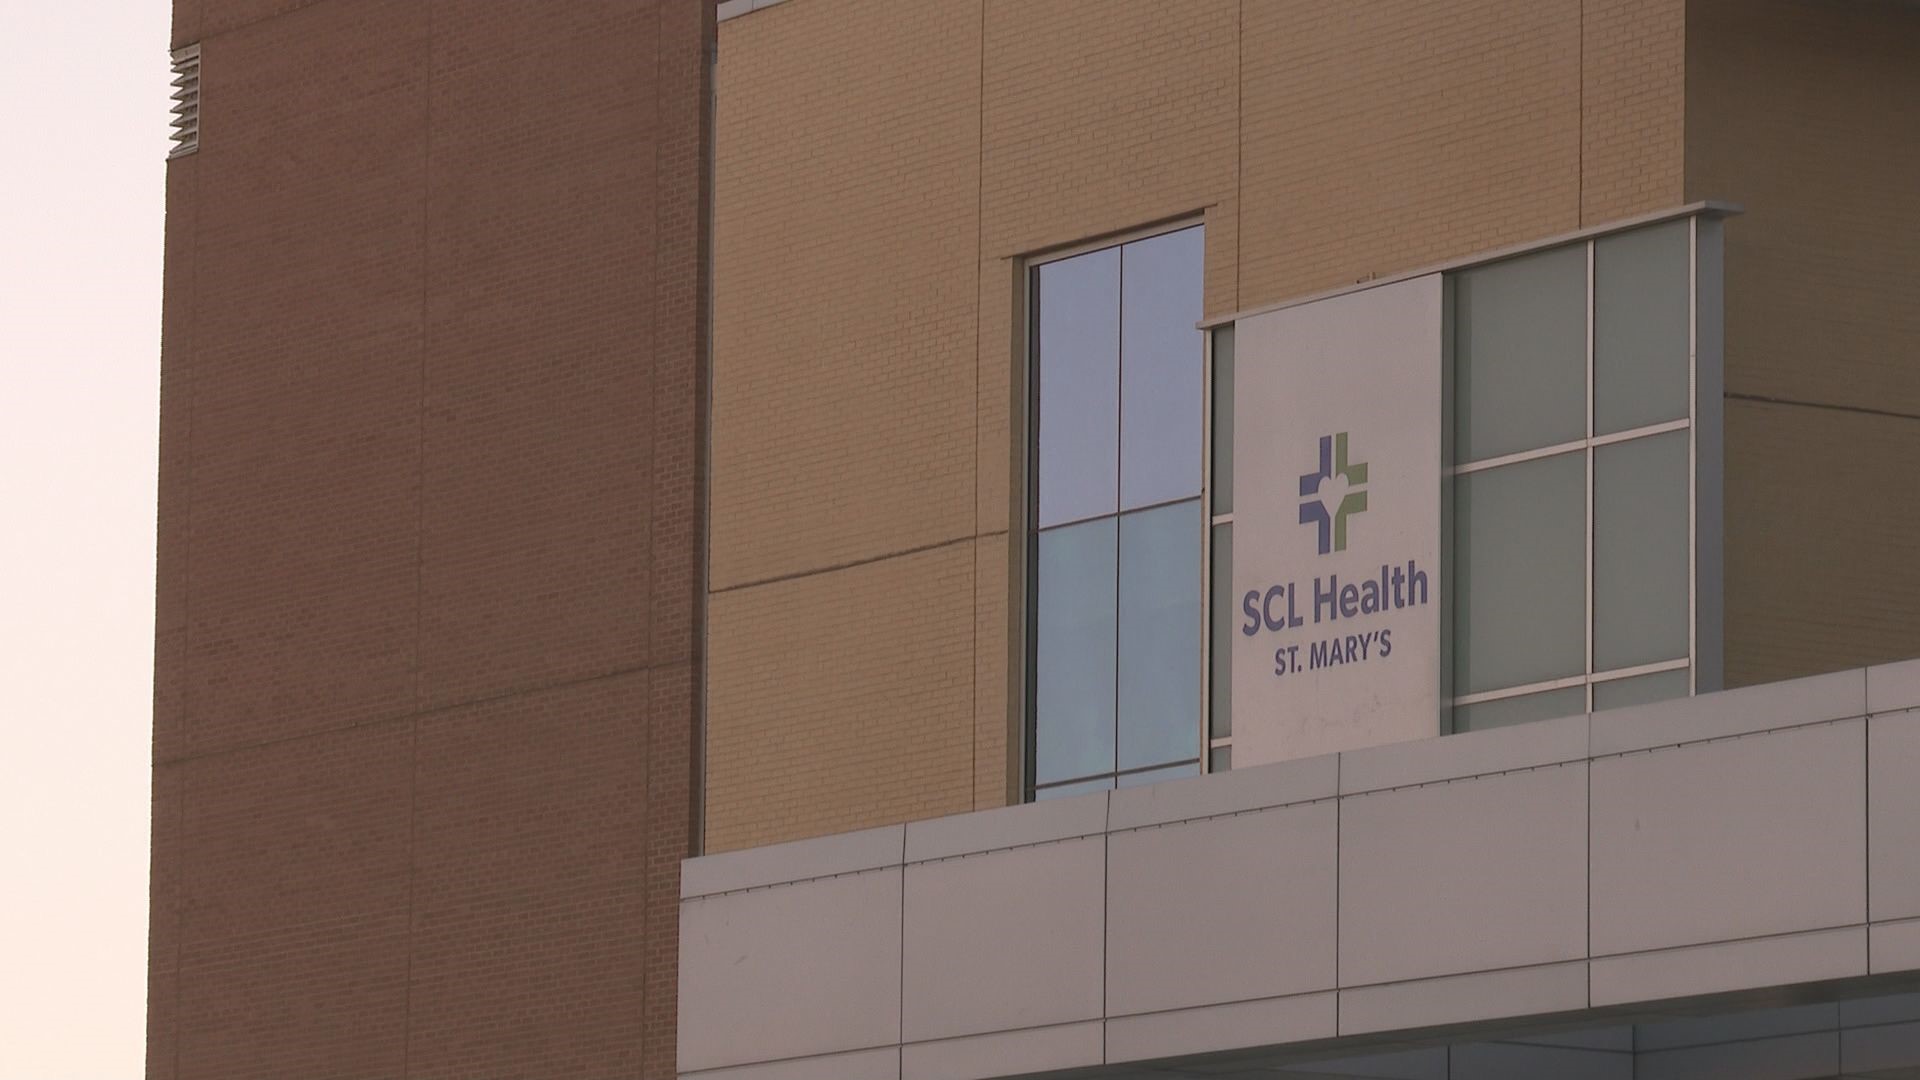 Two women who say they were victims of Christopher Lambros filed a lawsuit this week suggesting a Grand Junction hospital failed to protect patients from Lambros.